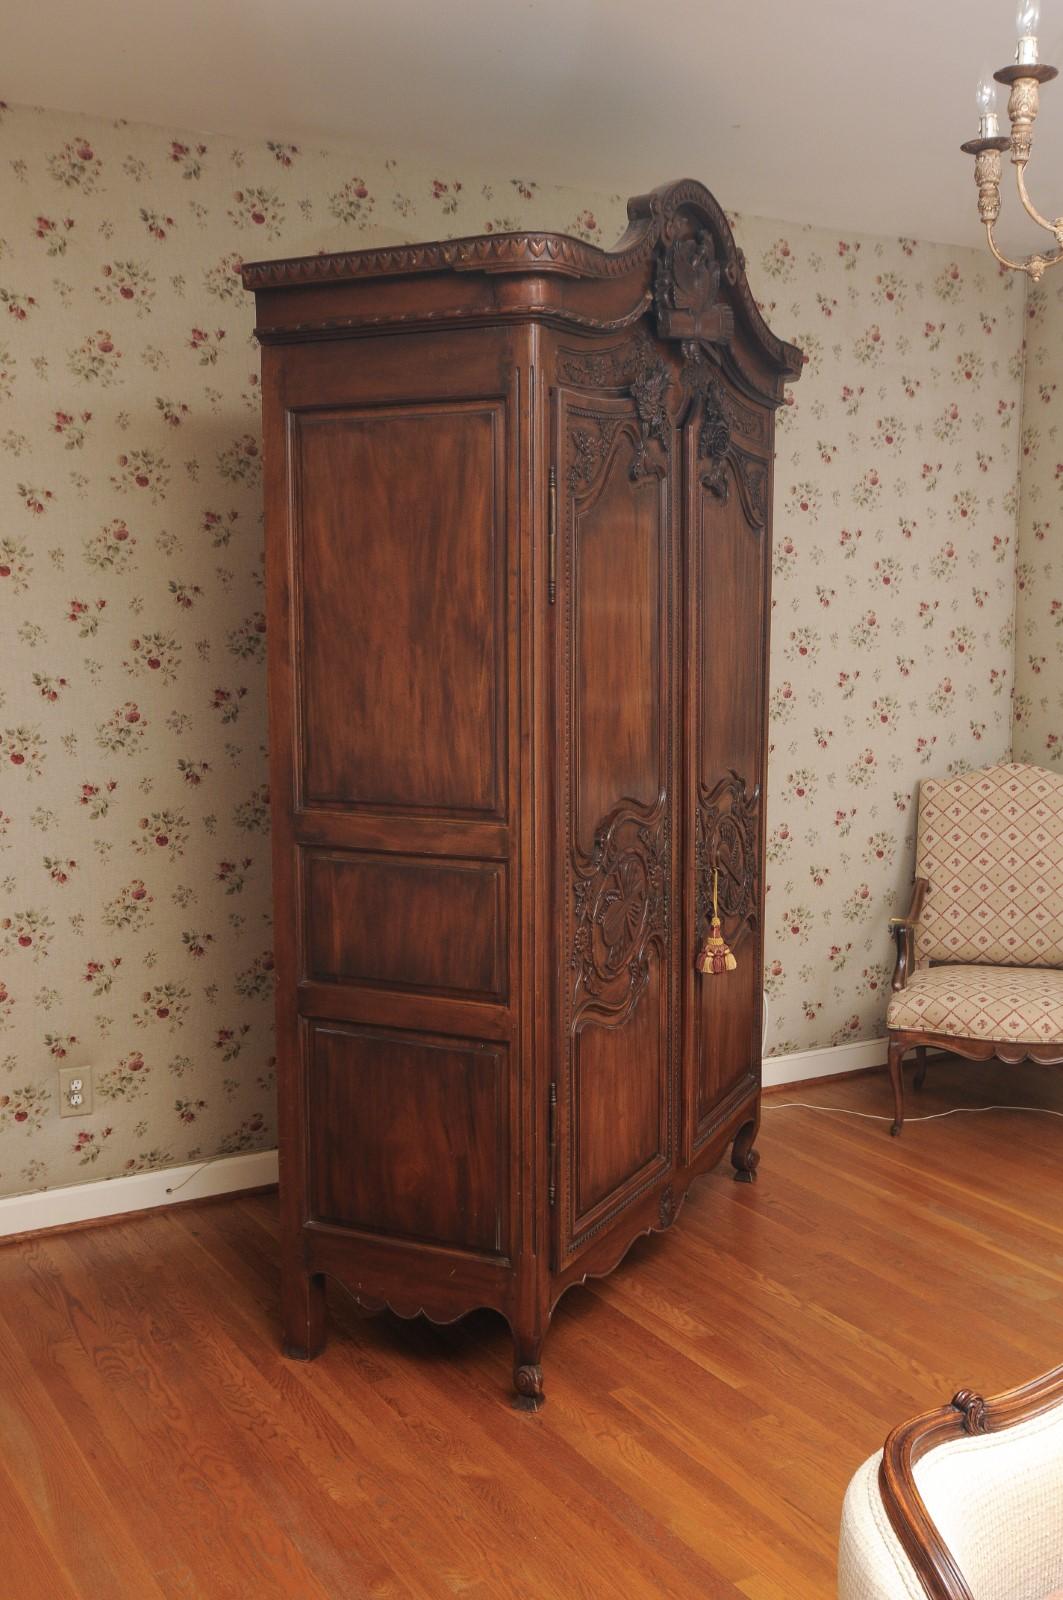 A French walnut wedding armoire from the late 19th century, with carved doves, quiver and musical instruments. Created in France in the last decade of the 19th century, this walnut armoire features a 